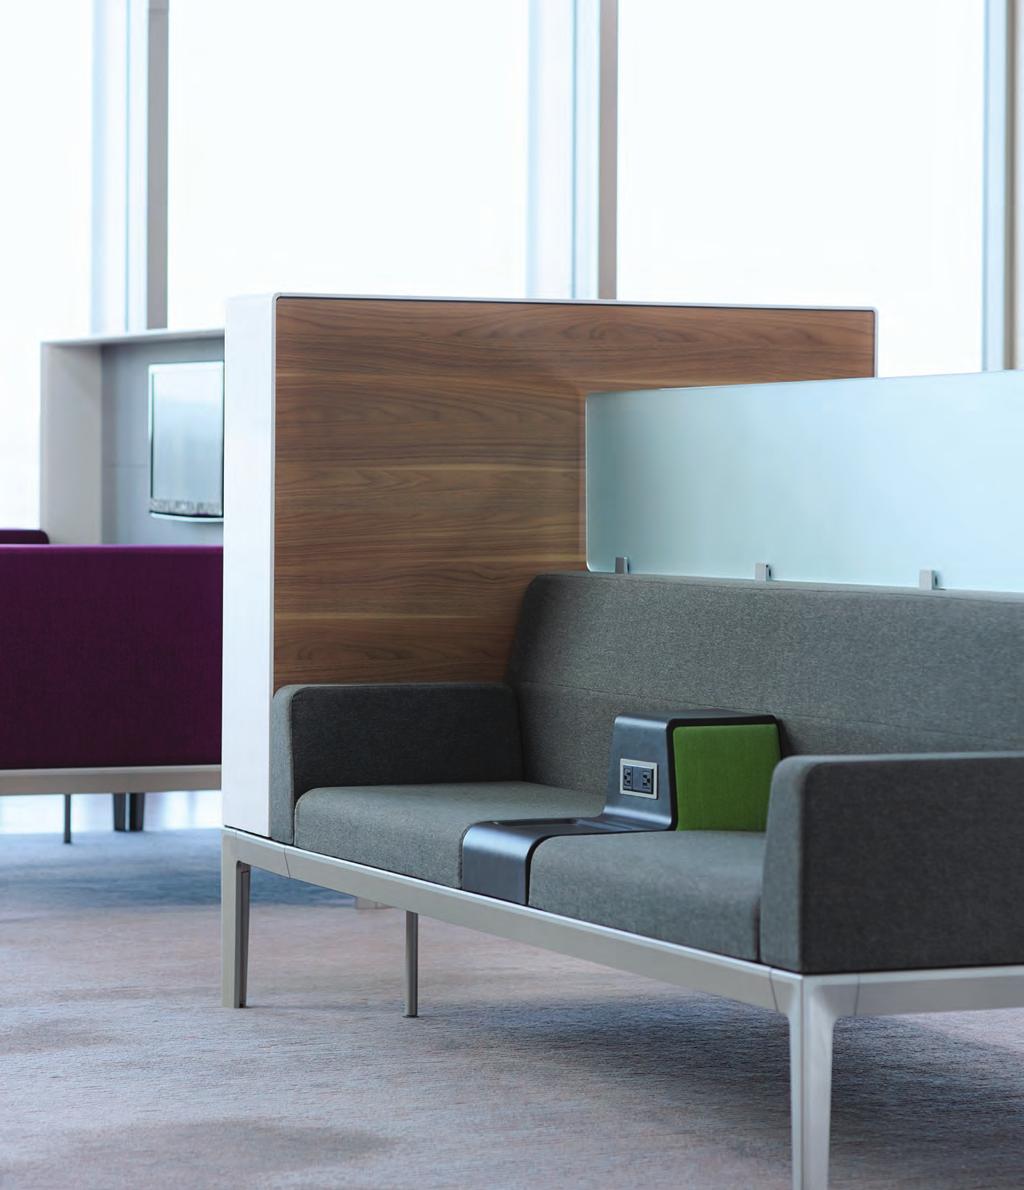 STEELCASE FAMILY OF BRANDS Steelcase and its family of brands, including Steelcase, Coalesse, Turnstone and sub-brands Steelcase Education and Steelcase Health offer a comprehensive portfolio of